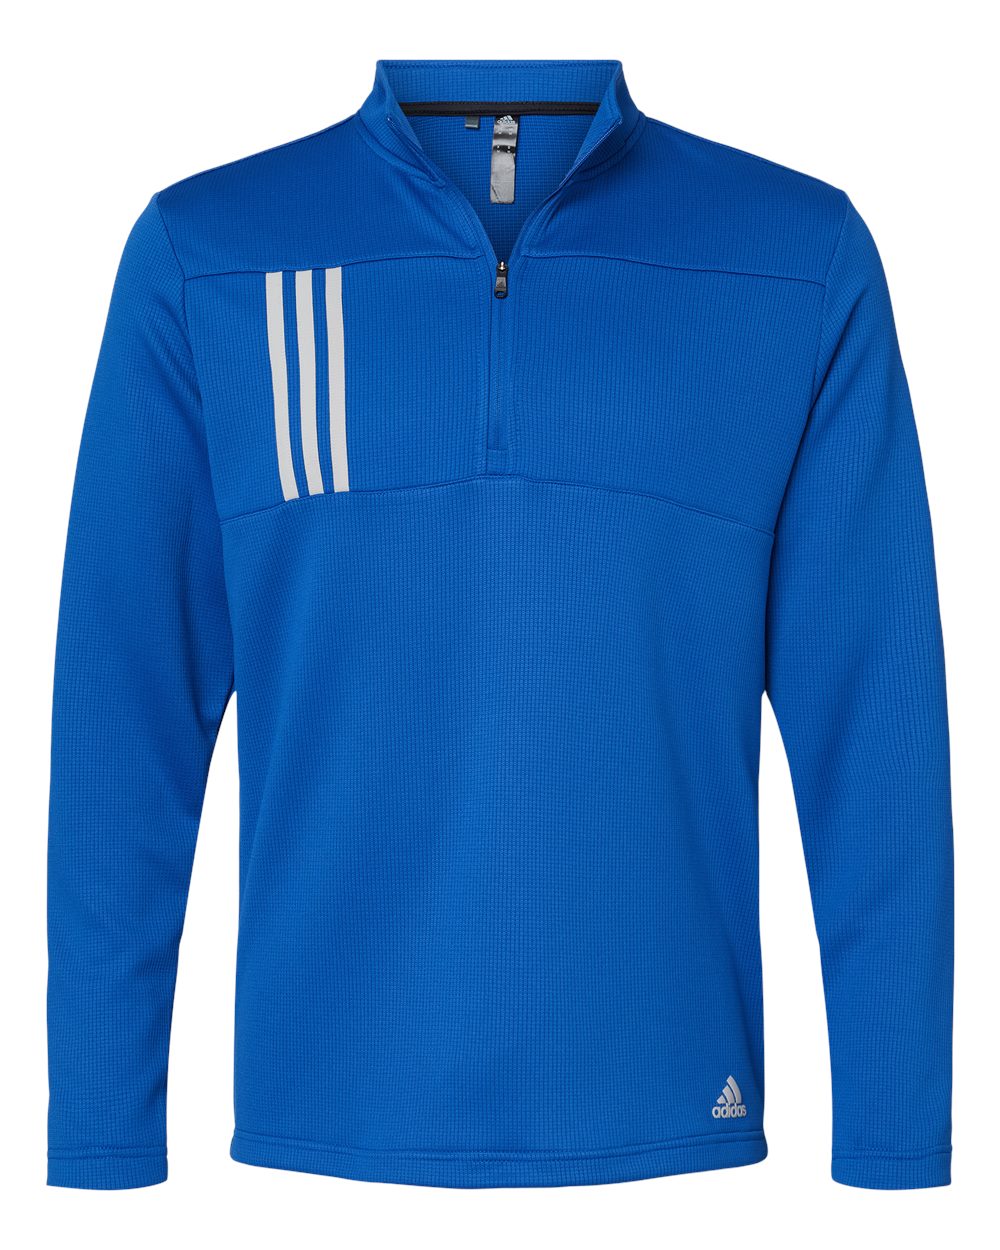 Adidas - 3-Stripes Double Knit Quarter-Zip Pullover - A482